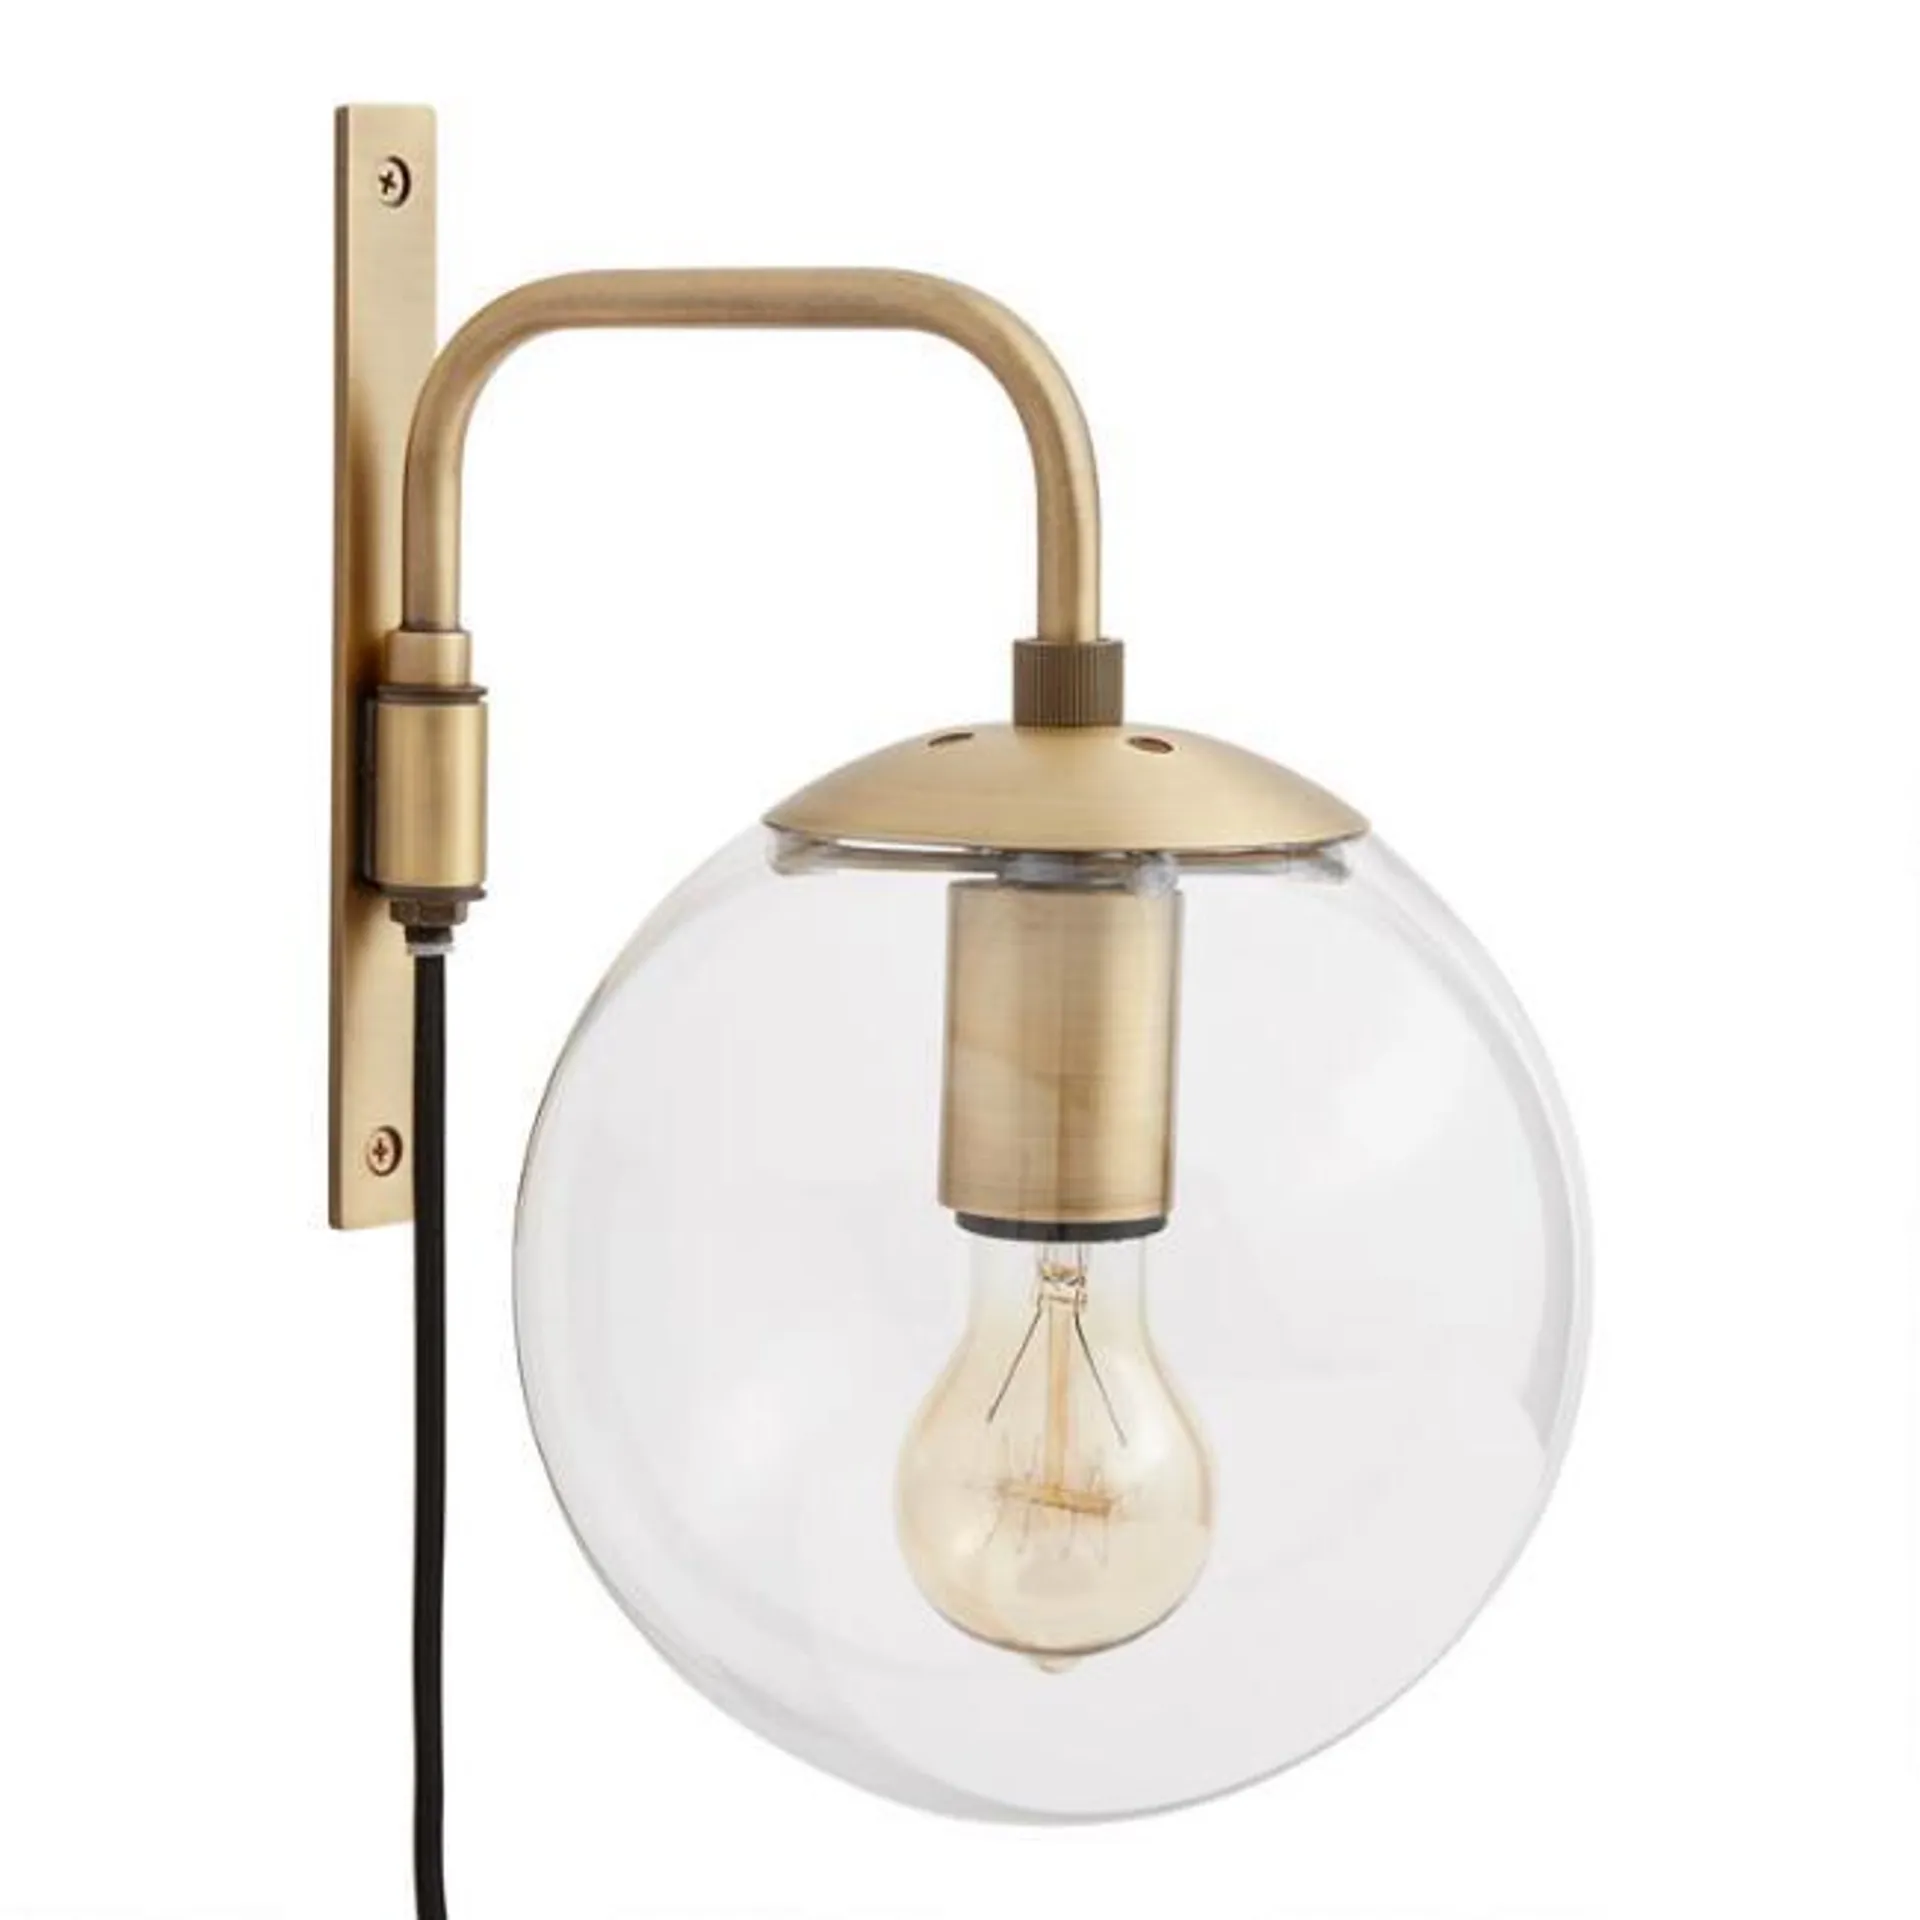 Glass Globe and Brass Wall Sconce